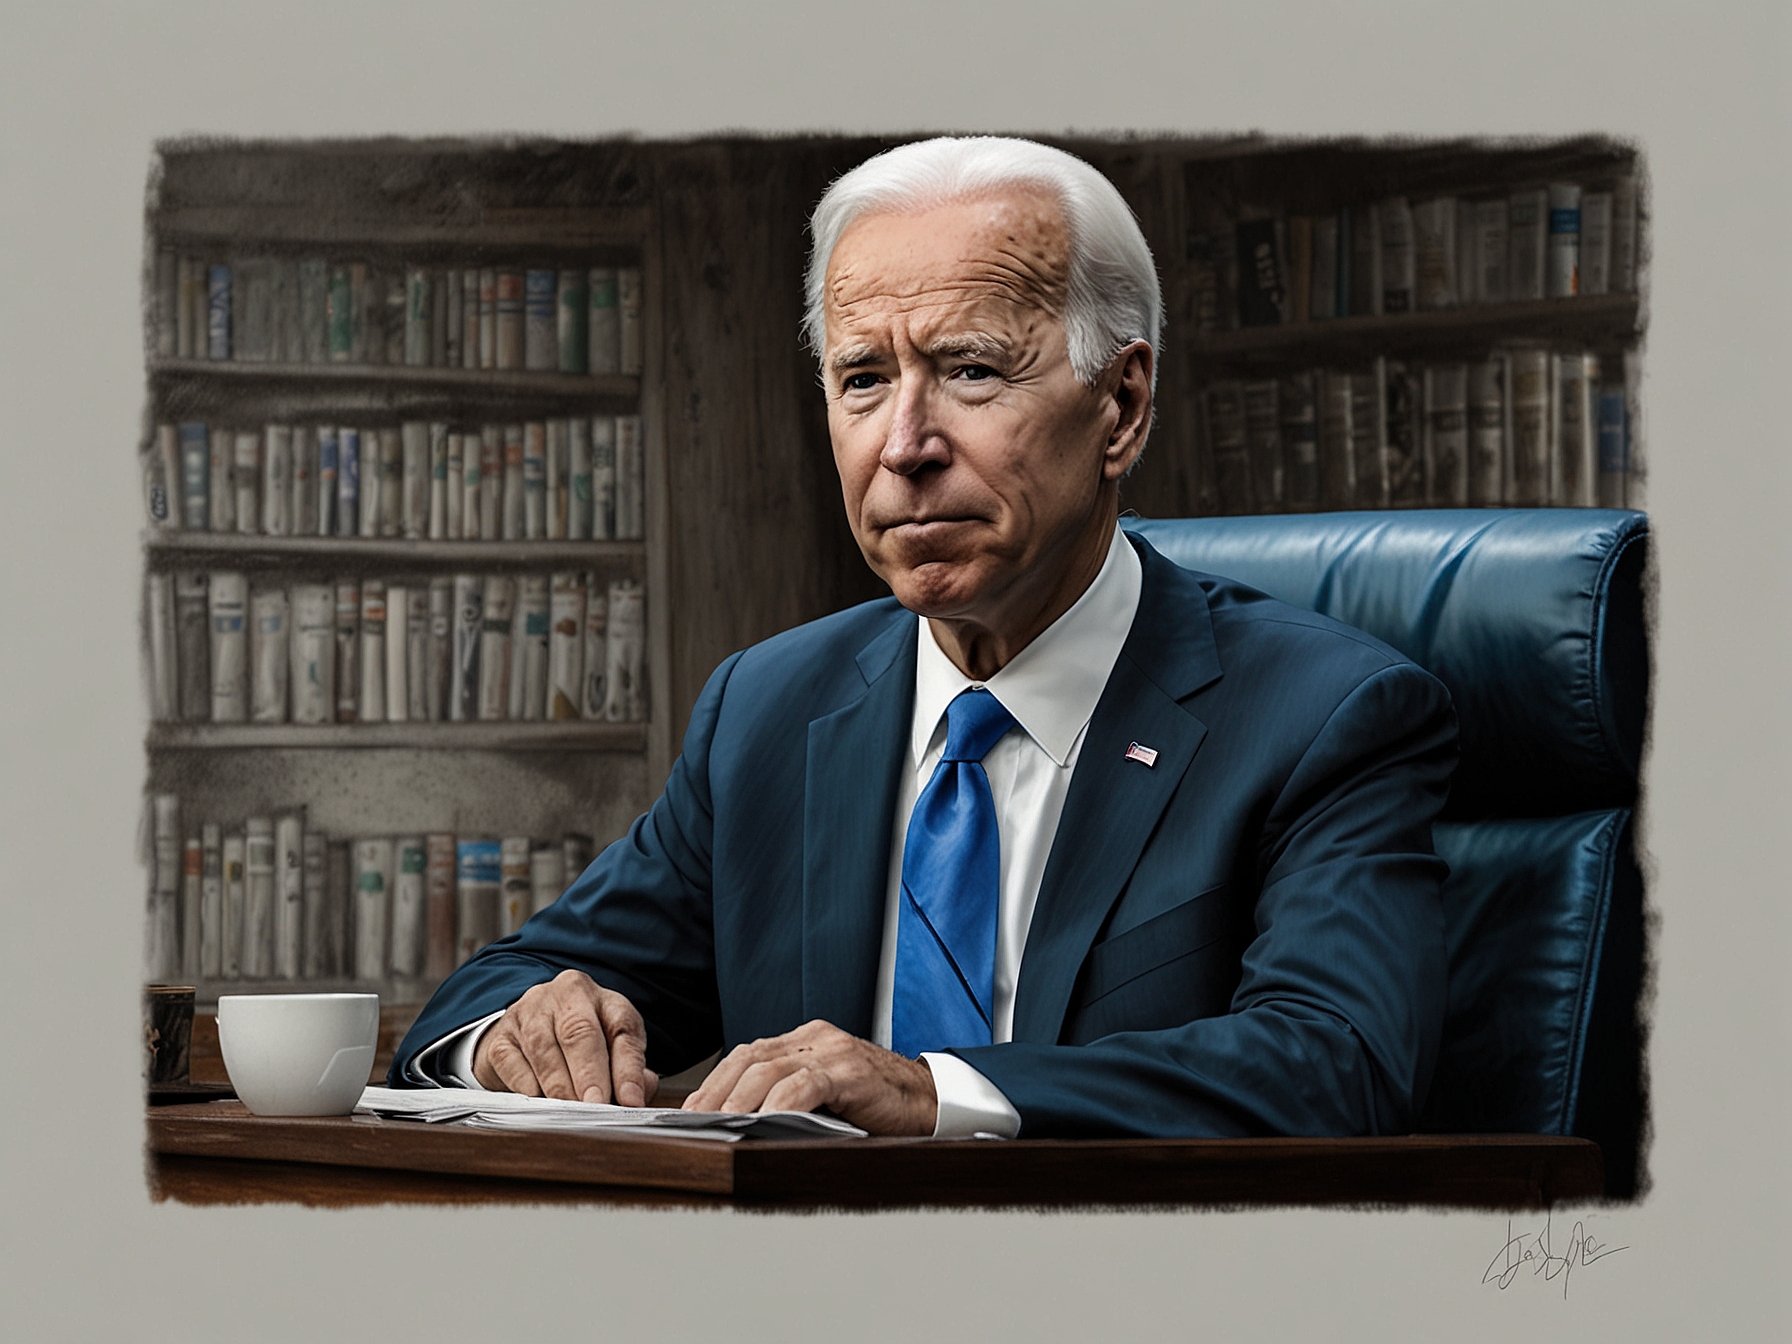 A political analyst discusses the implications of the Biden administration's sanctions on Tzav 9, emphasizing the evolving security challenges Israel faces amidst ongoing conflict.